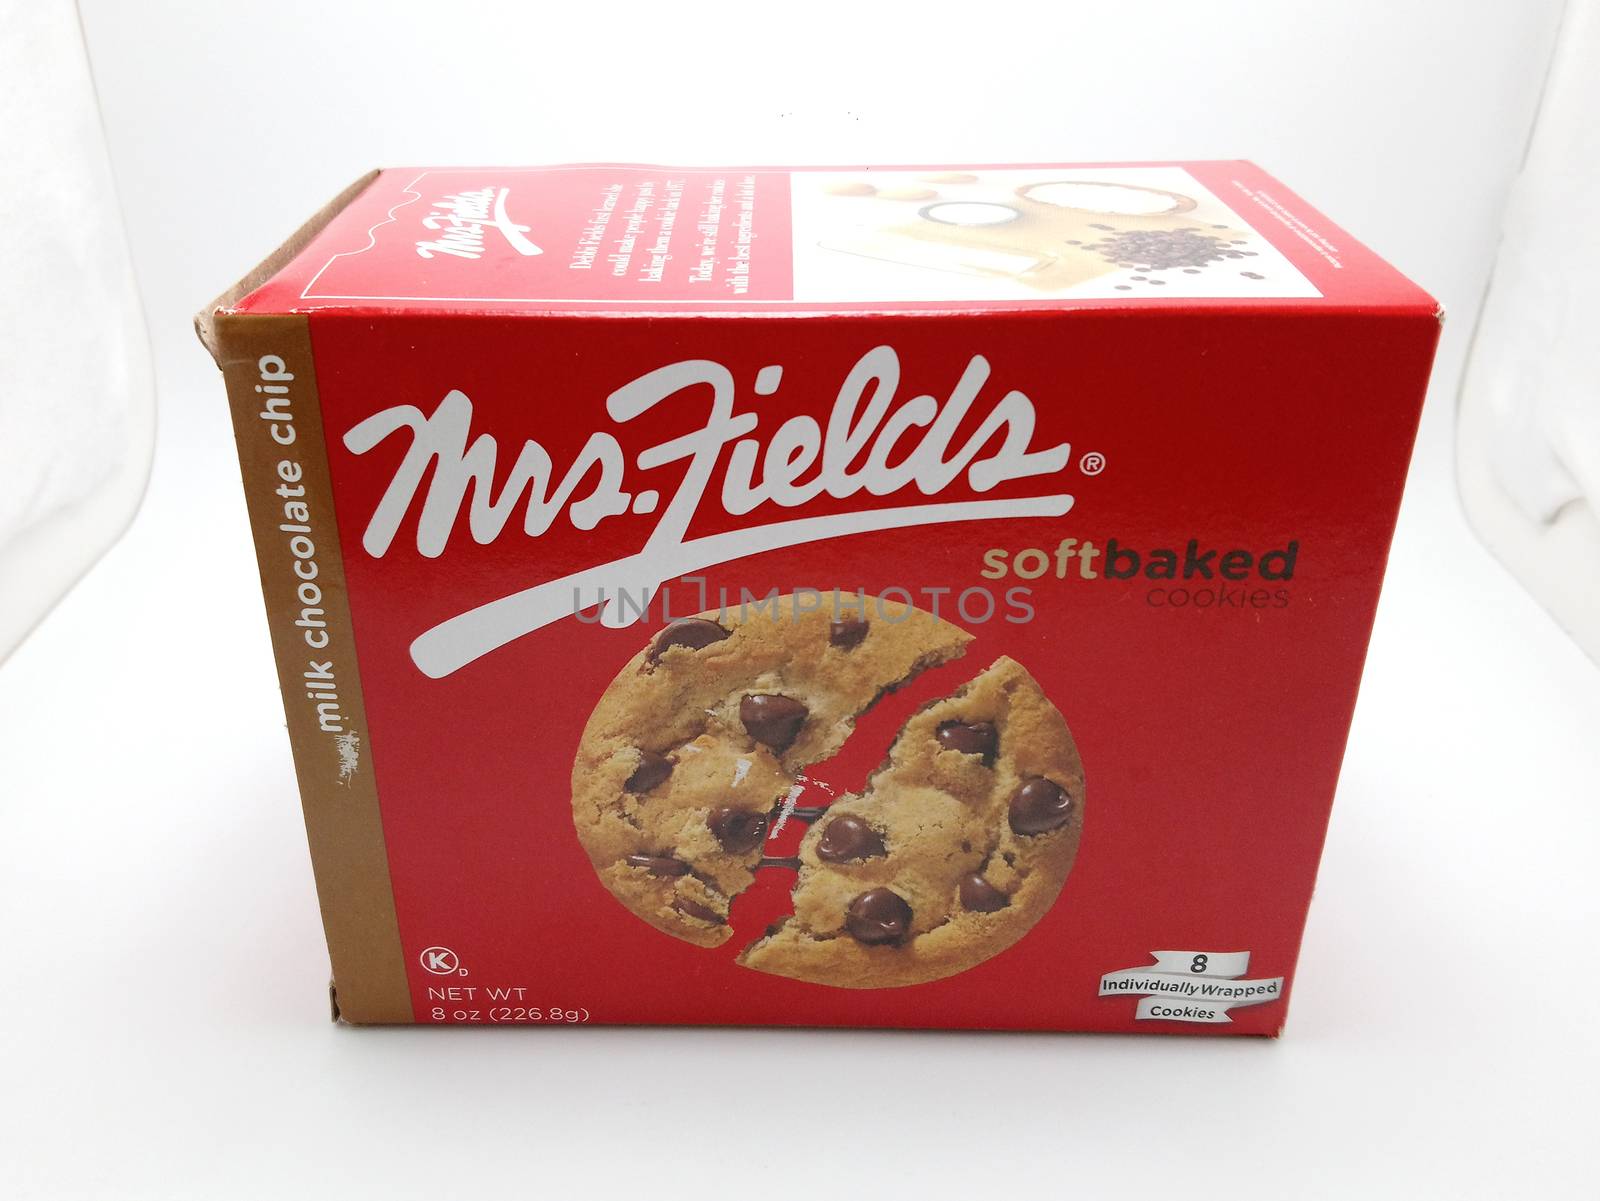 Mrs Fields soft baked cookies milk chocolate chip box in Manila, by imwaltersy